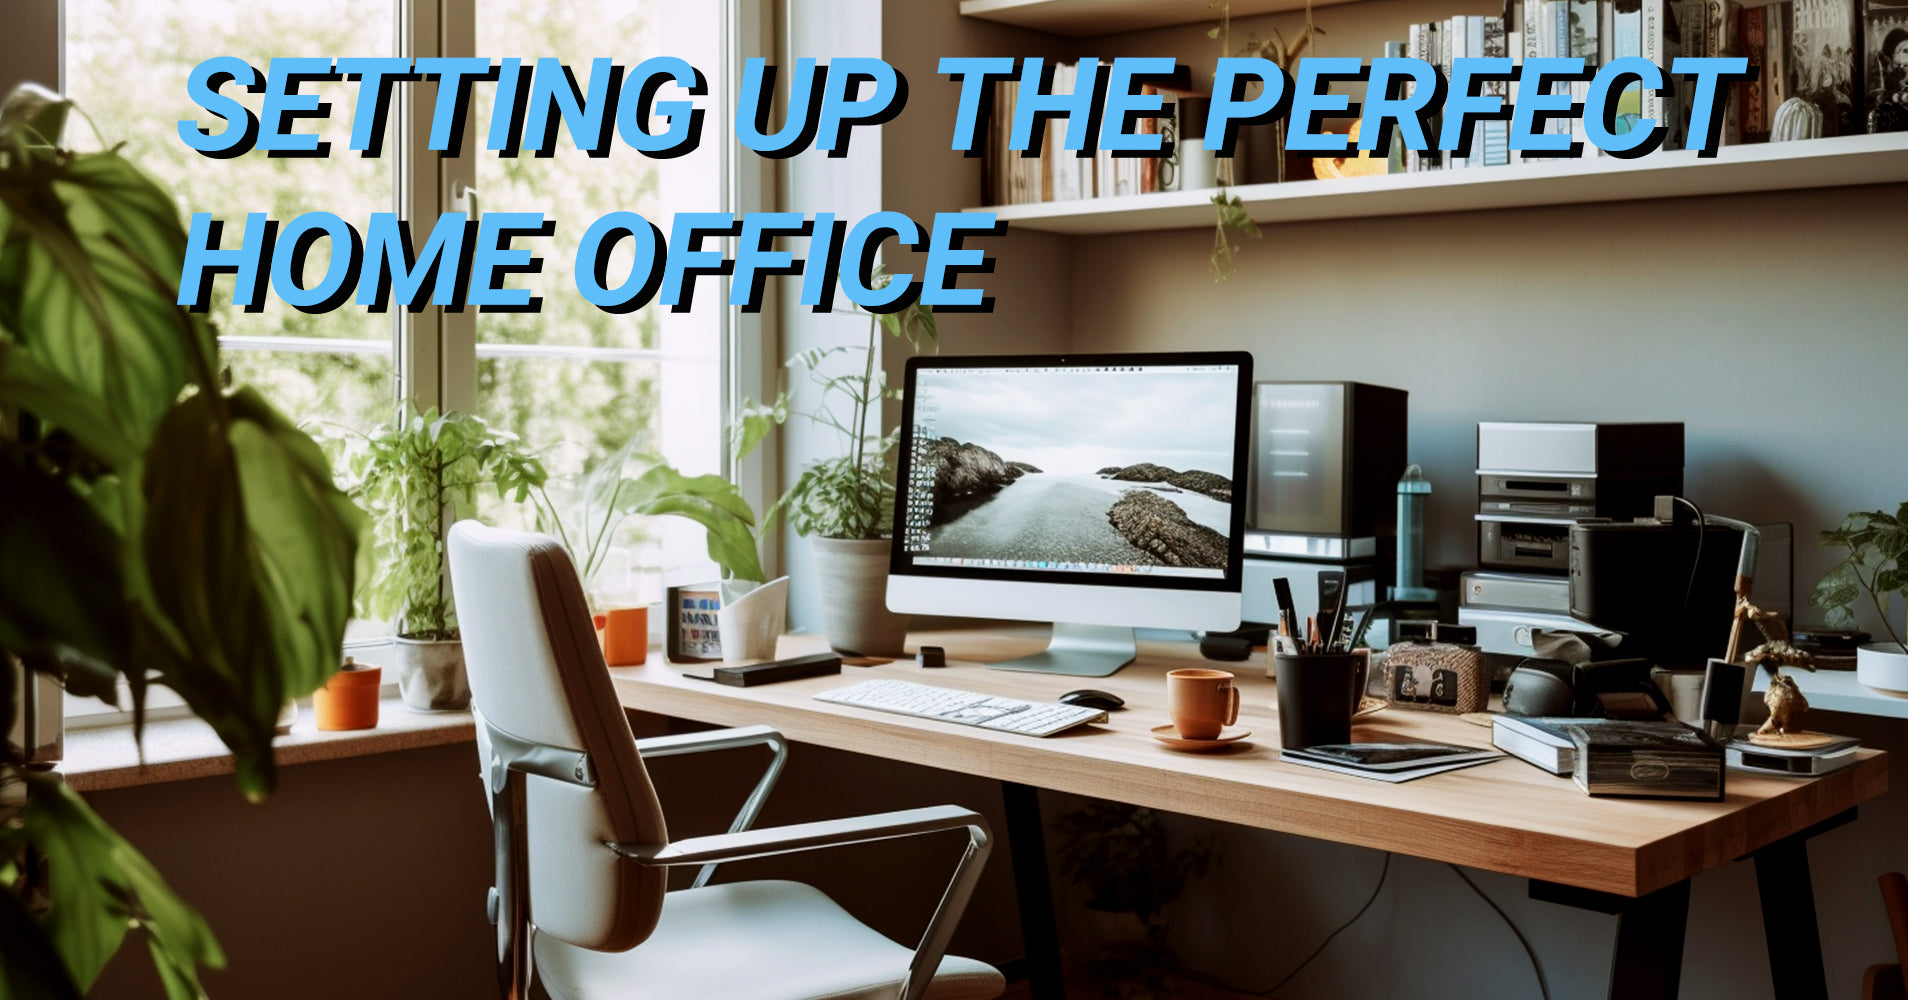 Remote Work Revolution: Setting Up the Perfect Home Office